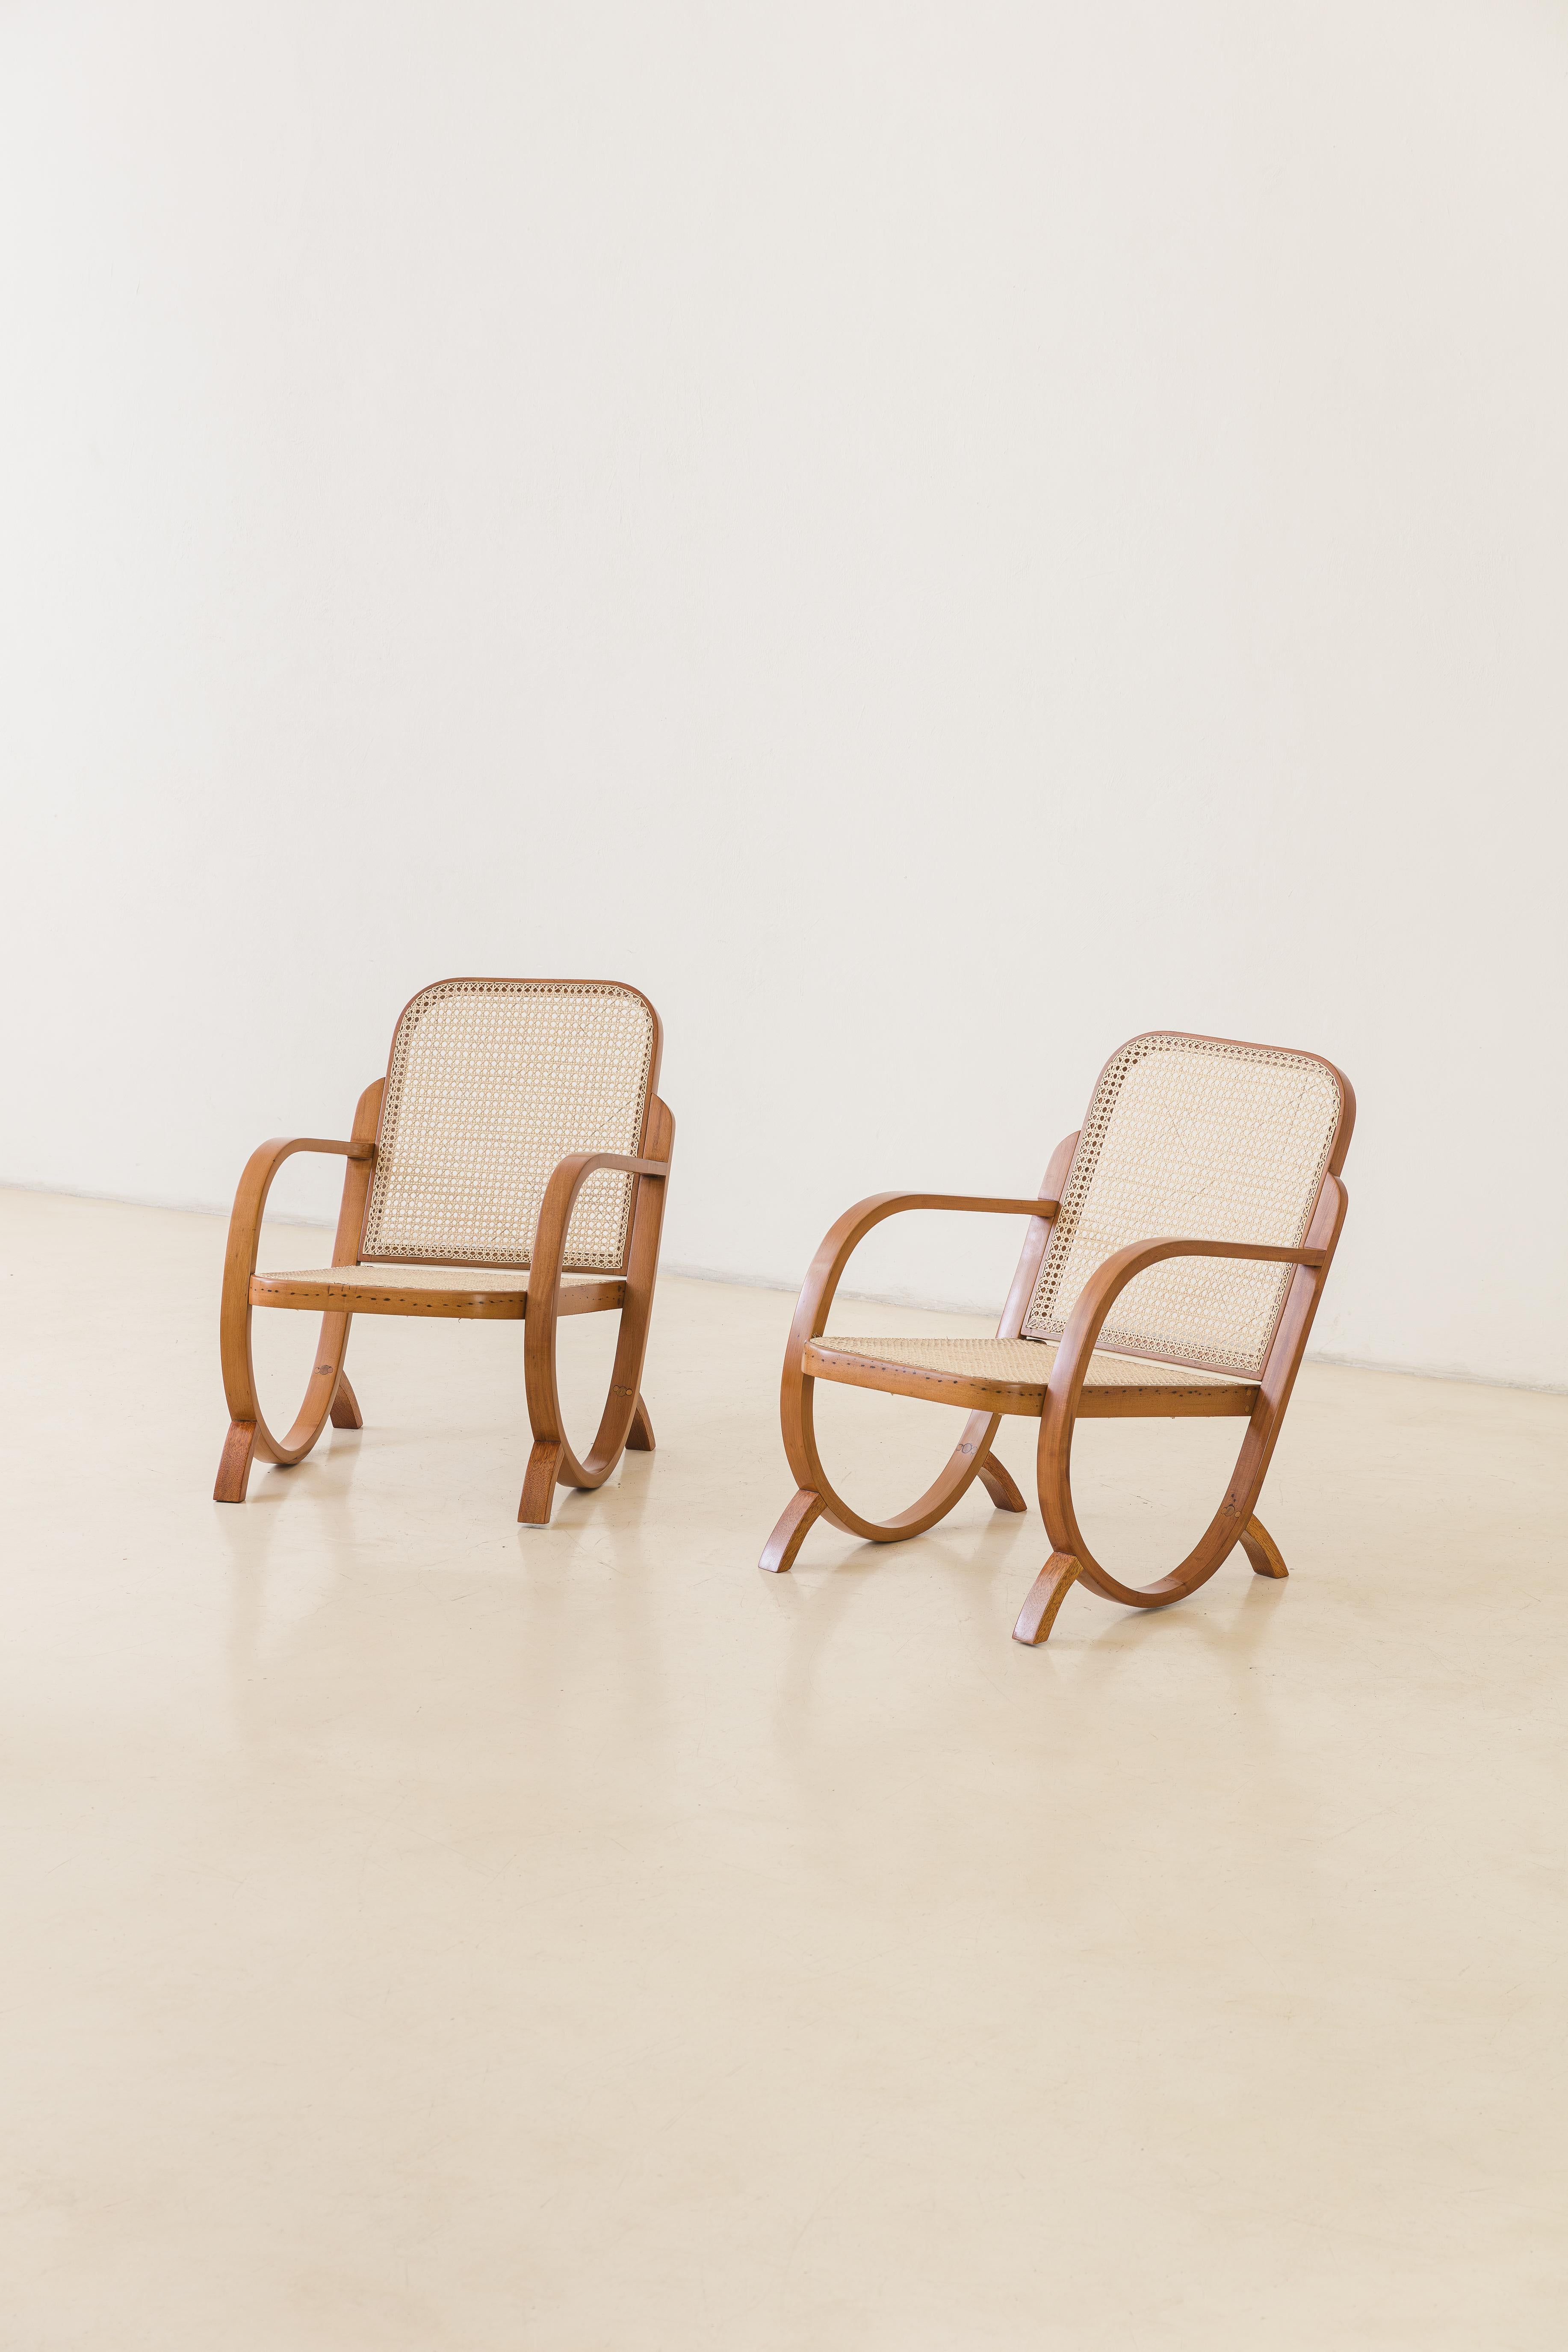 This pair of armchairs was produced by the Brazilian company Móveis Gerdau in the 1930s. The restored pieces were made of bent wood and plastic cane, which provides optimal ventilation for furniture in tropical climates. These armchairs exude